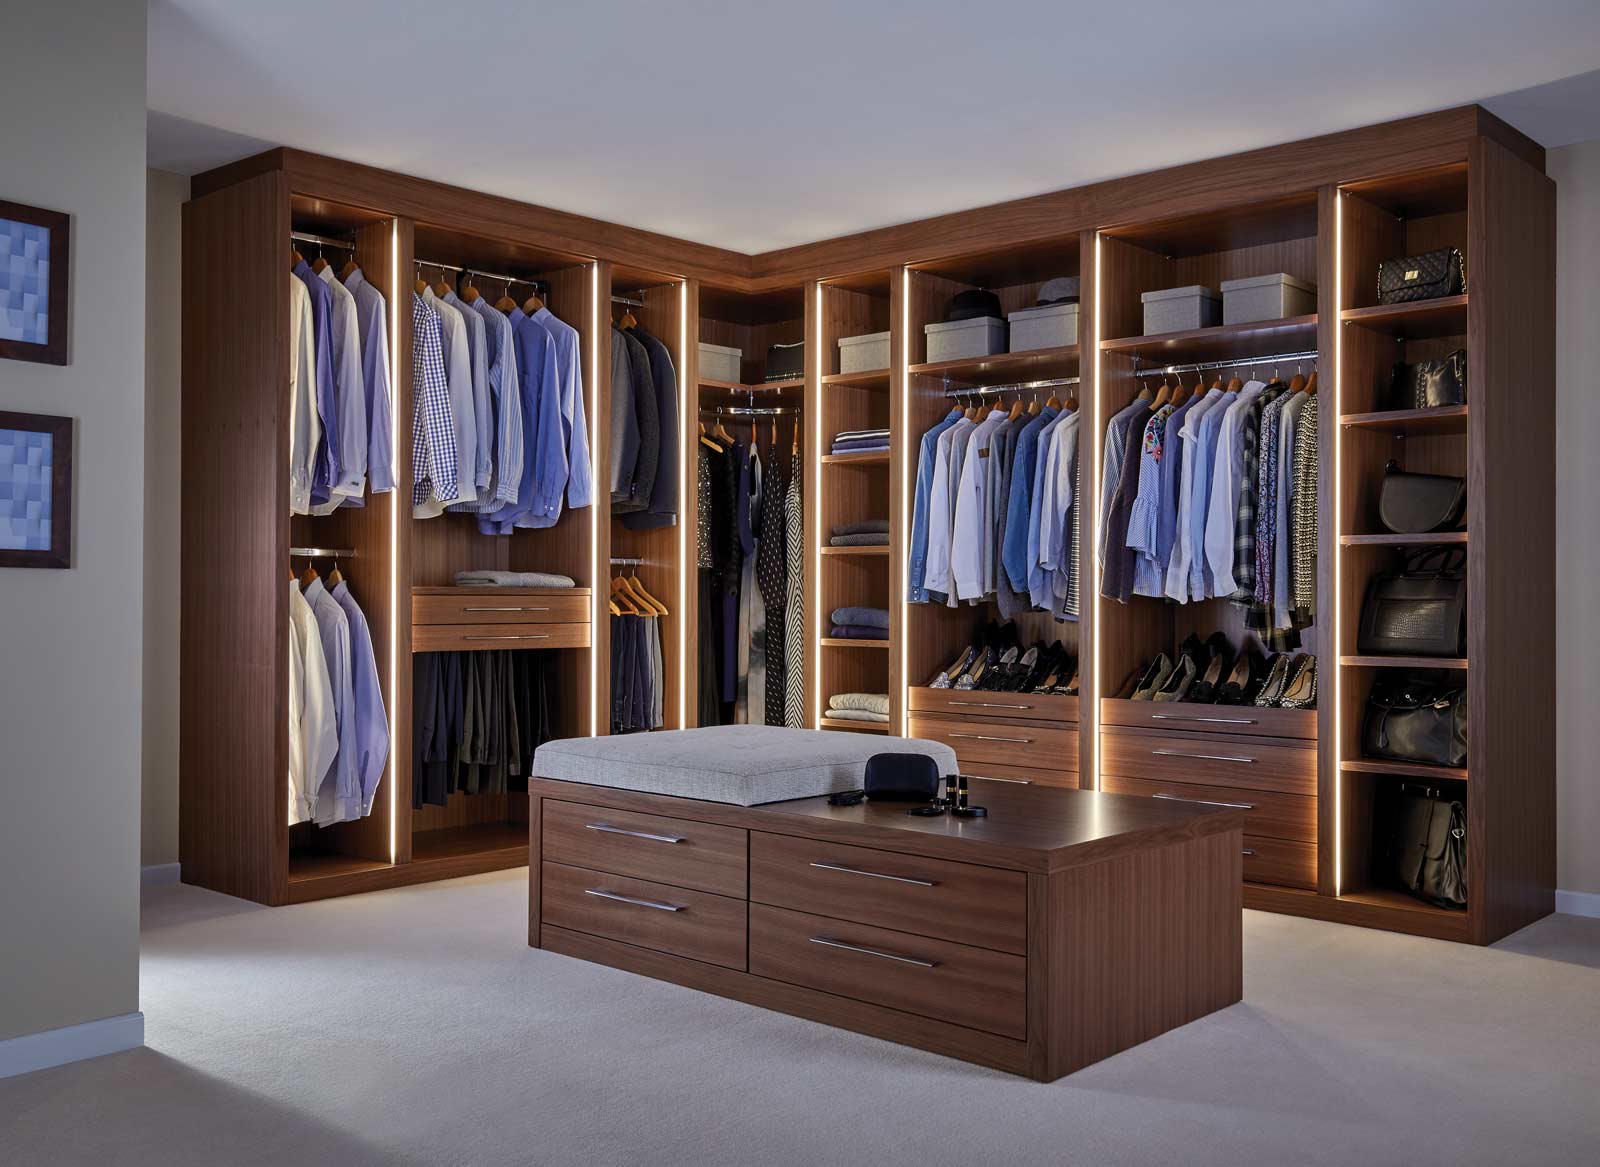 Create Your Dream Dressing Room with Walk-in Wardrobes | Glide & Slide